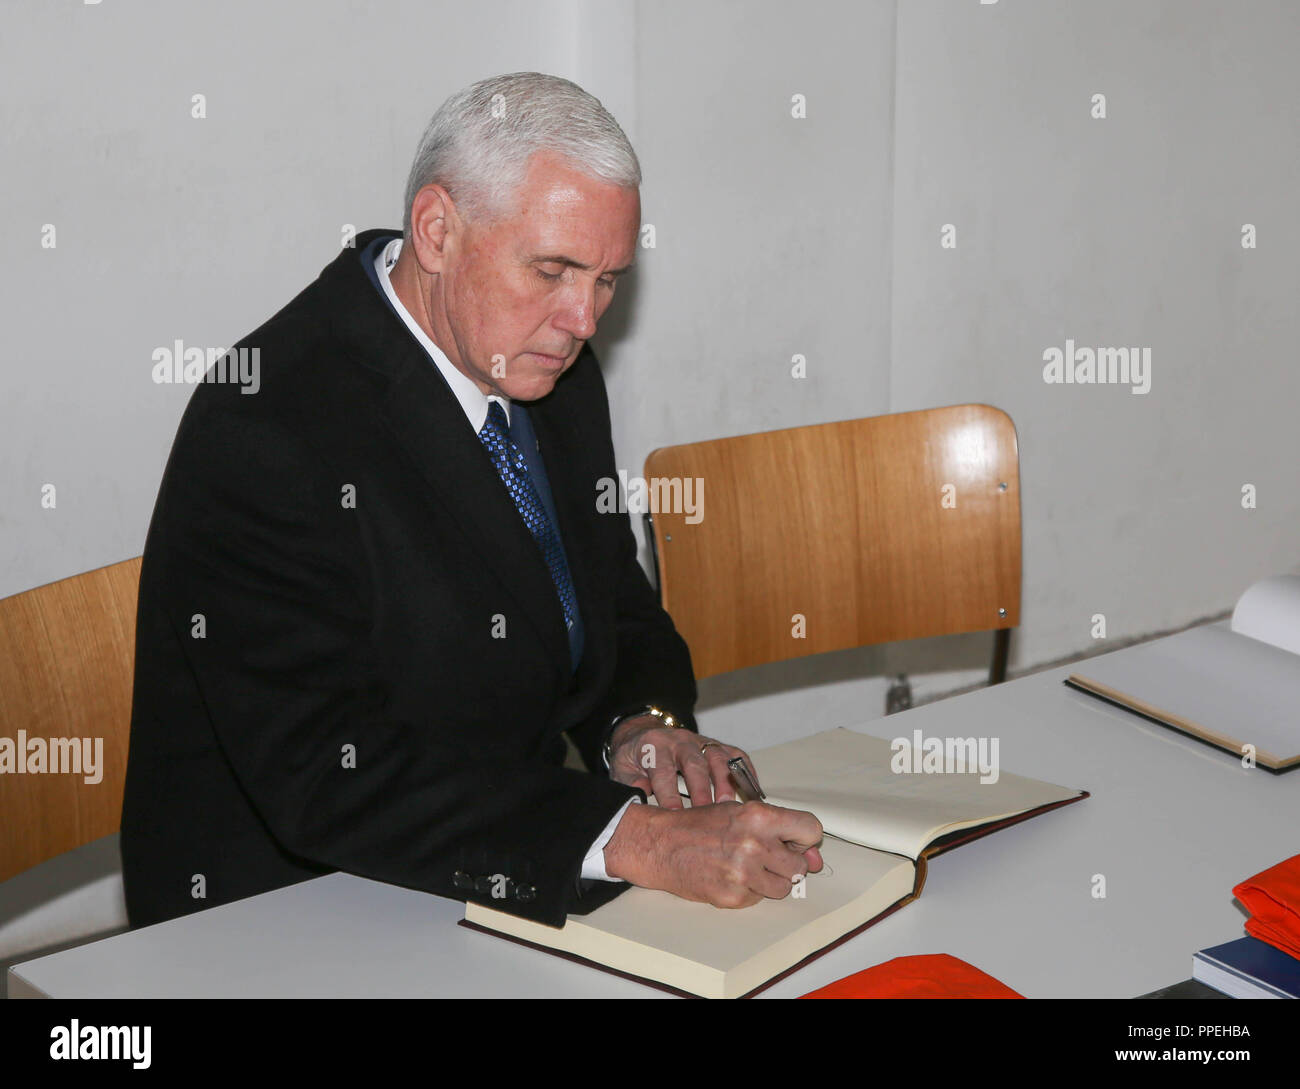 The US Vice President, Mike Pence, signs the guestbook of the museum during his visit to the Dachau Concentration Camp Memorial Site. Stock Photo